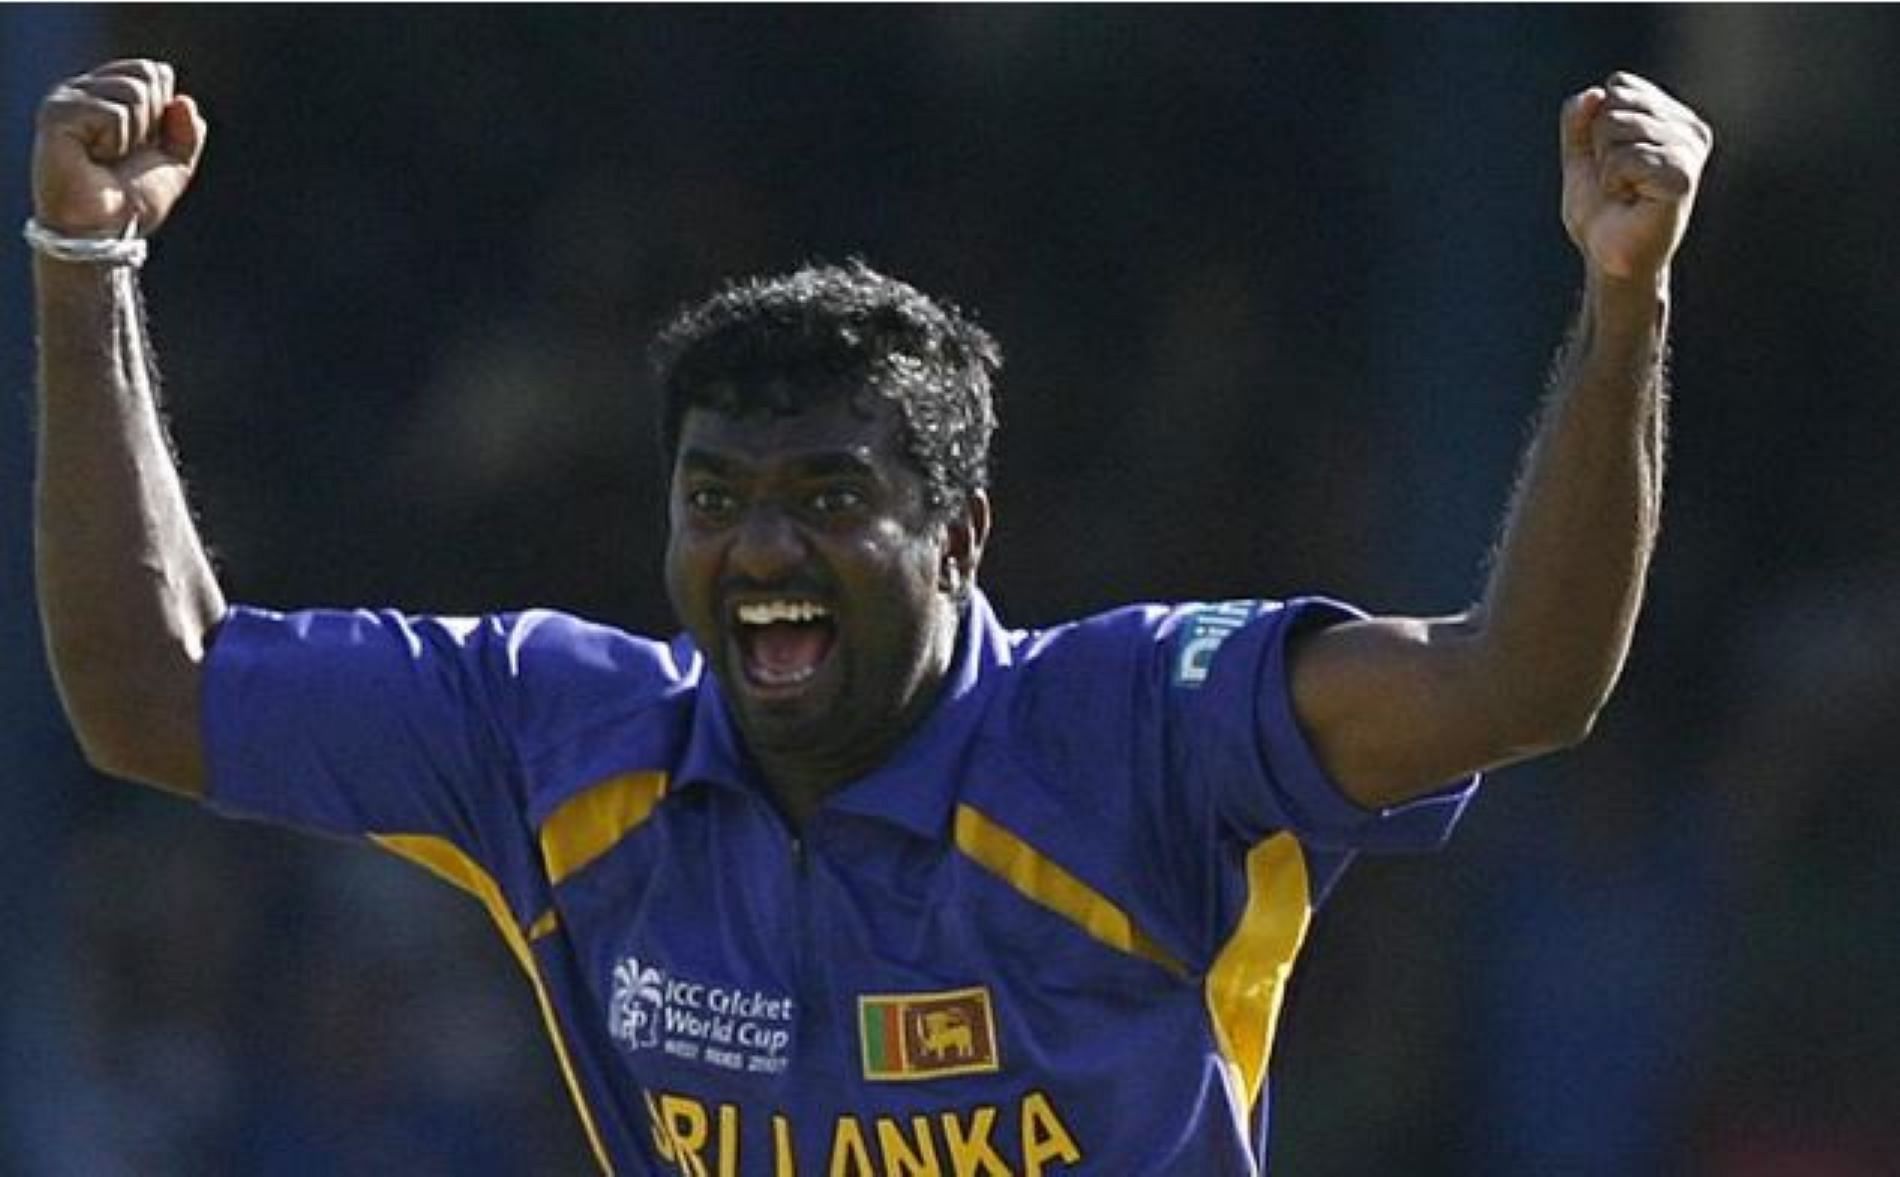 Muralitharan bowled a brilliant spell to lead Sri Lanka to the 2007 final.